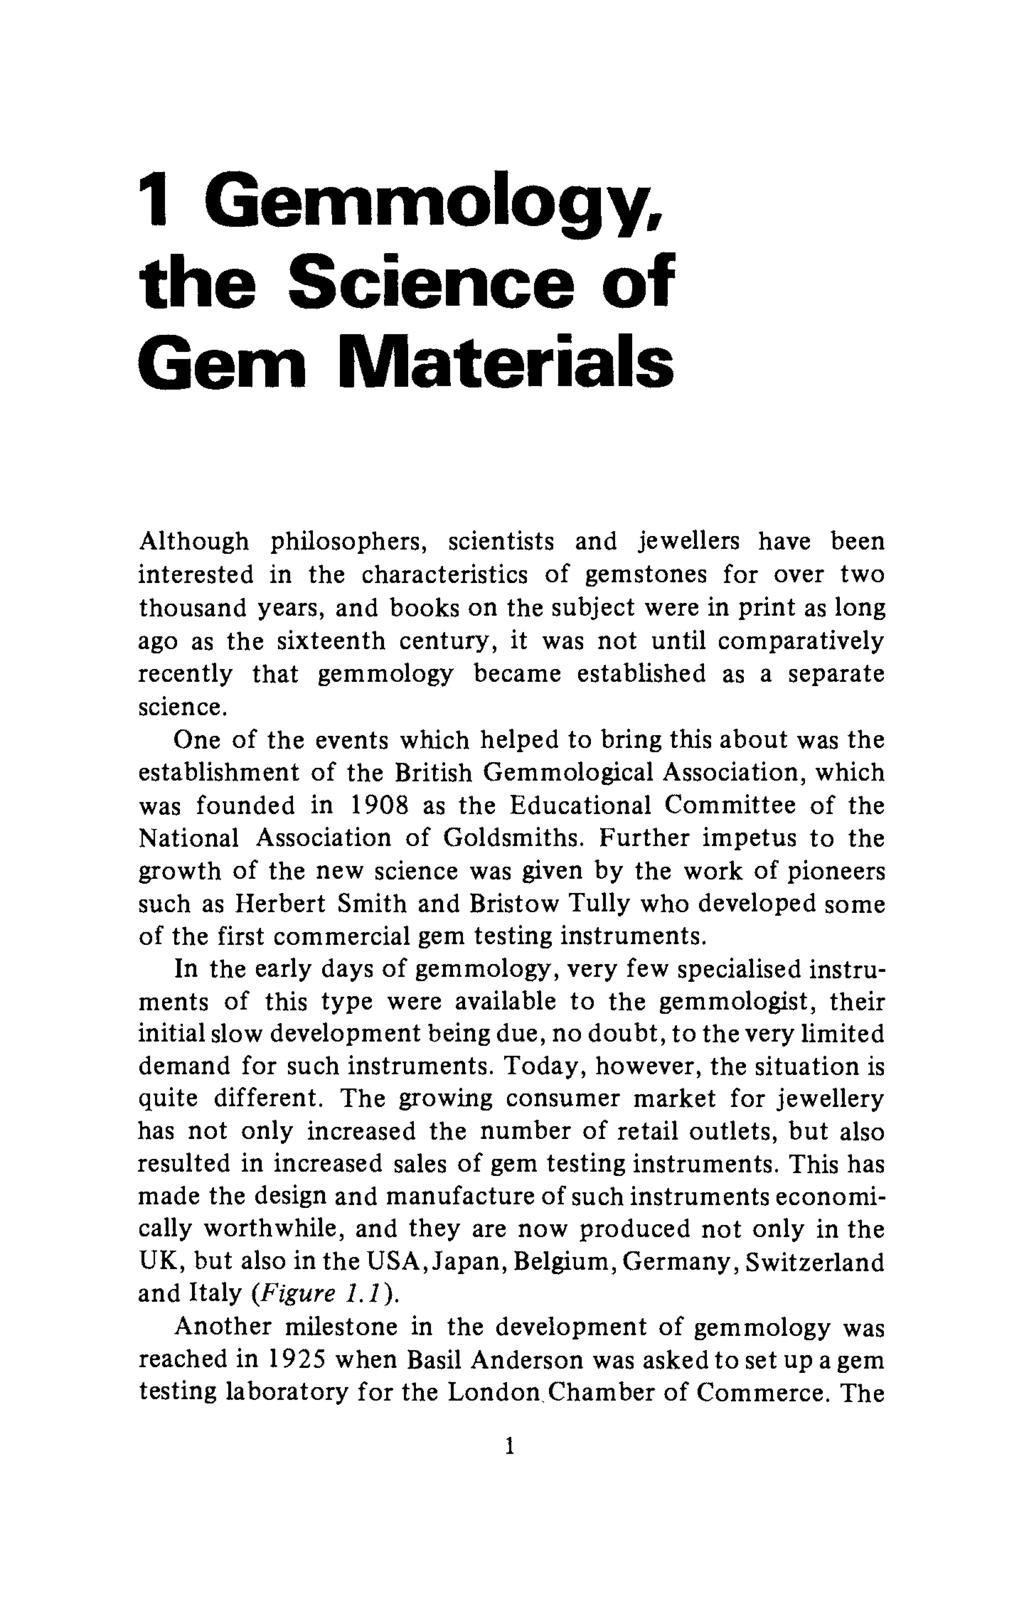 1 Gemmology, the Science of Gem Materials Although philosophers, scientists and jewellers have been interested in the characteristics of gemstones for over two thousand years, and books on the